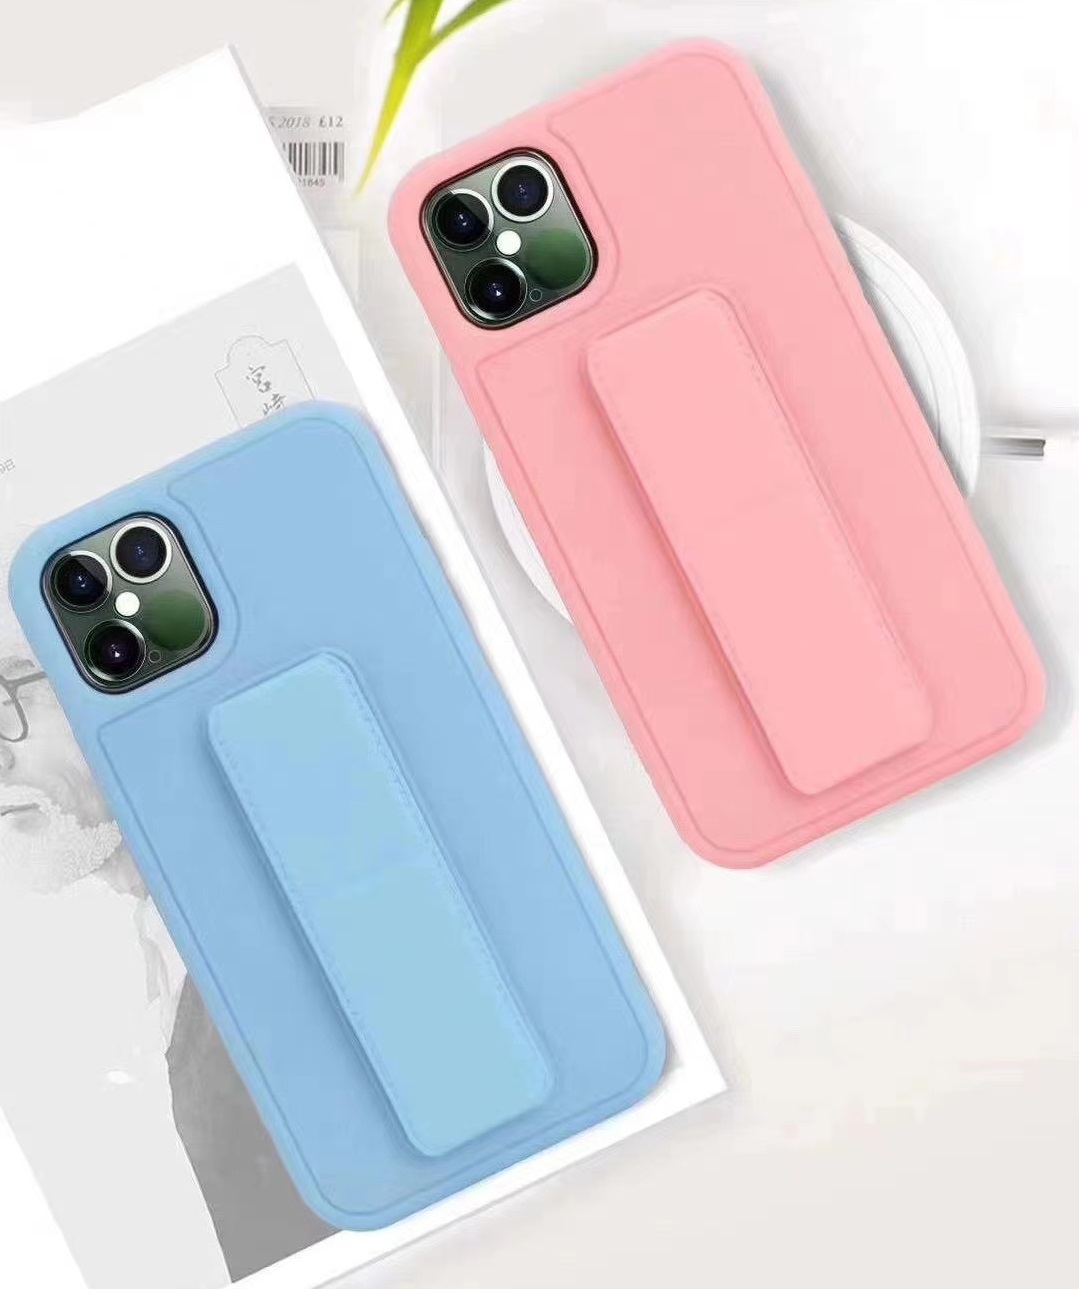 Candy Color Ốp lưng iPhone 11 Soft TPU+PC Case With Holder Apple iPhone XS Max XR Hard Case iPhone 11 Pro Max Phone Cover Shockproof Case